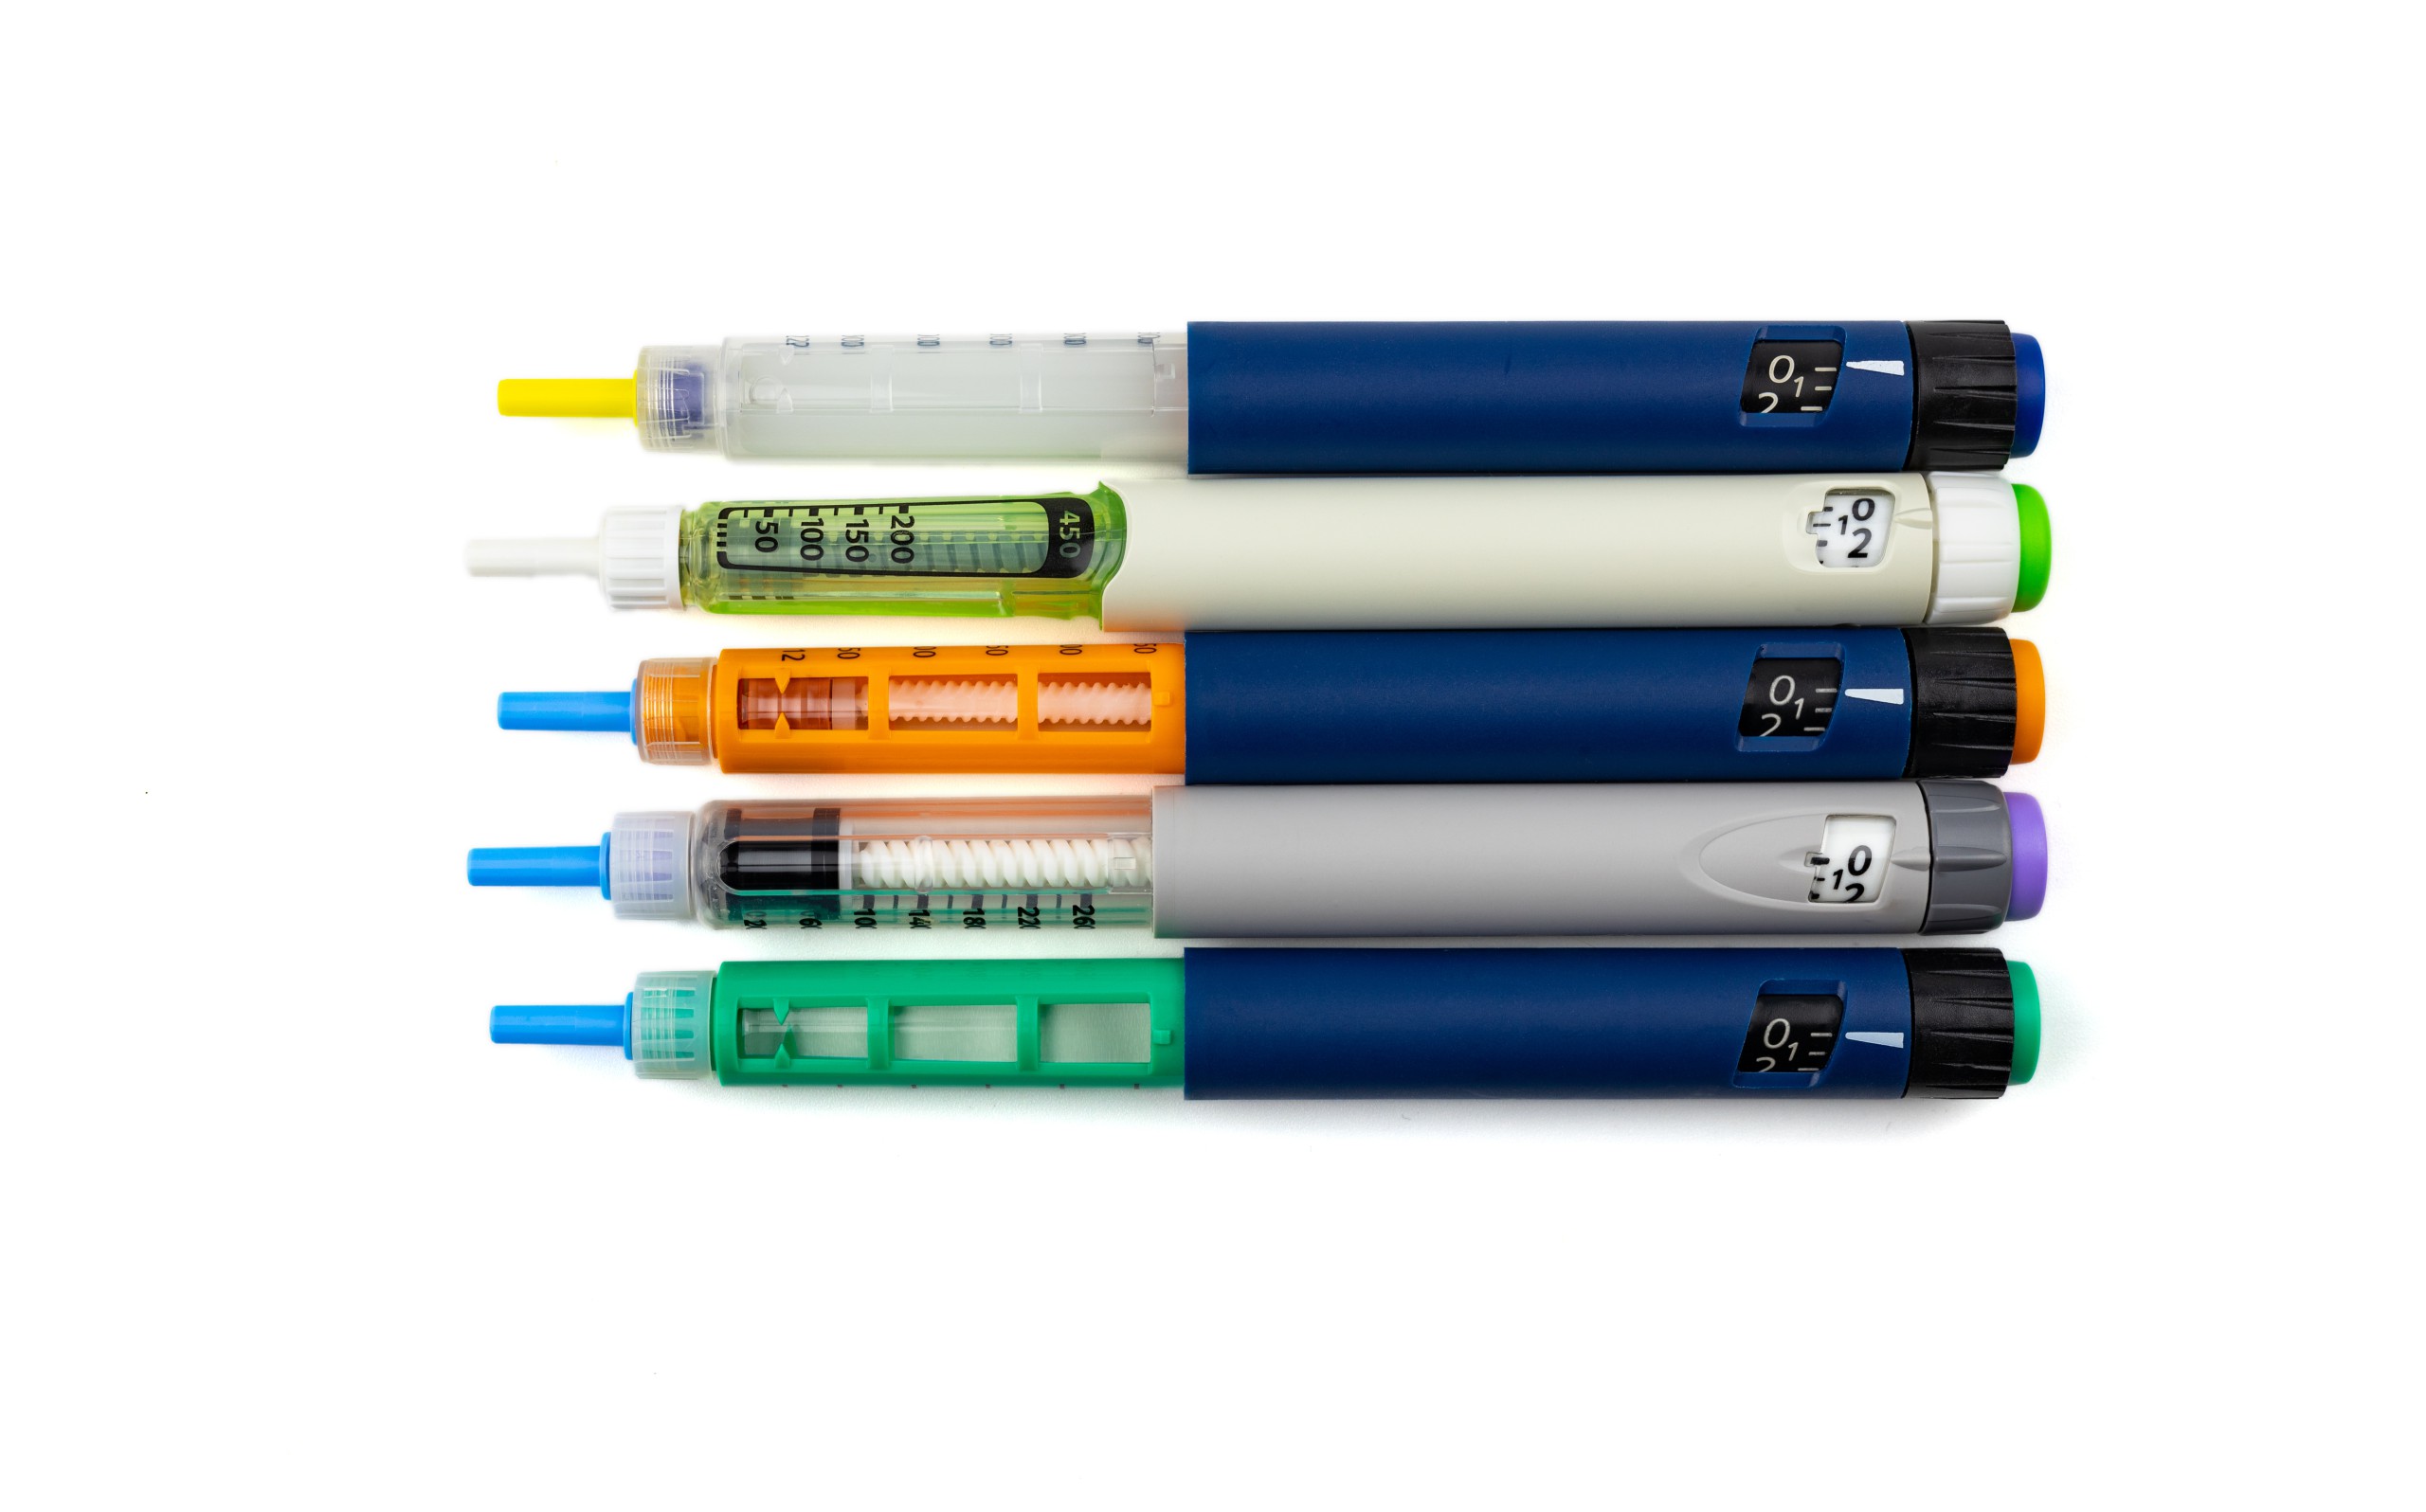 Insulin injector pens for hormonal therapy of diabetic patients, such as those pictured here, can now be made using Techmer PM’s HiFill® HC healthcare color compounds. Credit: richir/Shutterstock.com